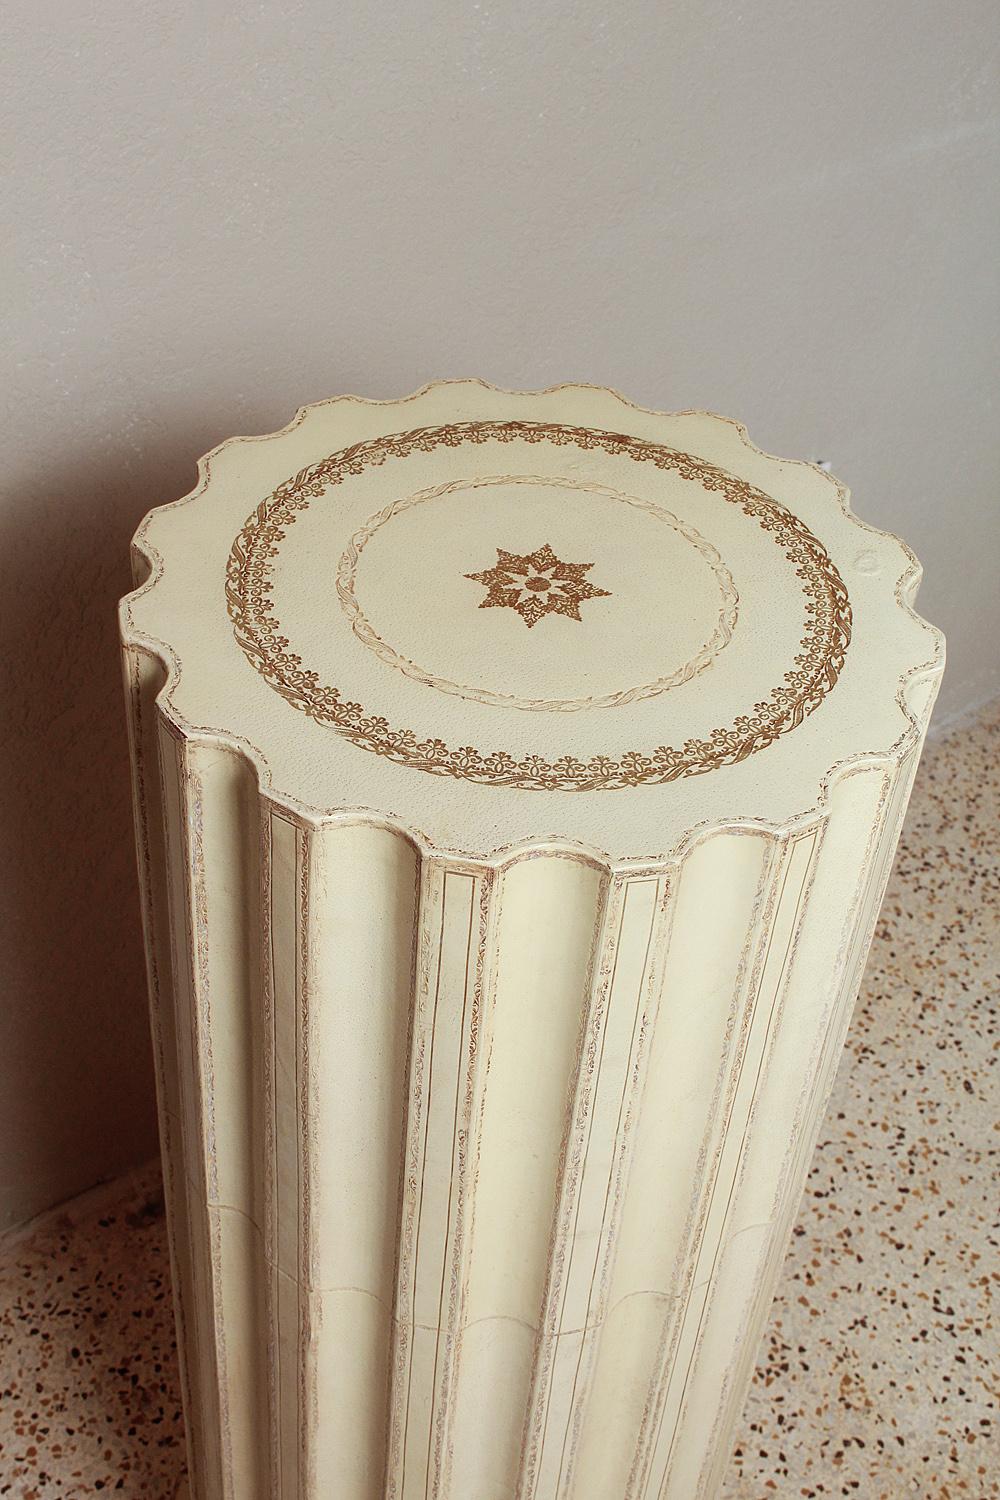 Elegant, classic Maitland-Smith Florentine style glazed leather pedestal in cream with gold embossed details. A handsome statement in both traditional and modern settings.

